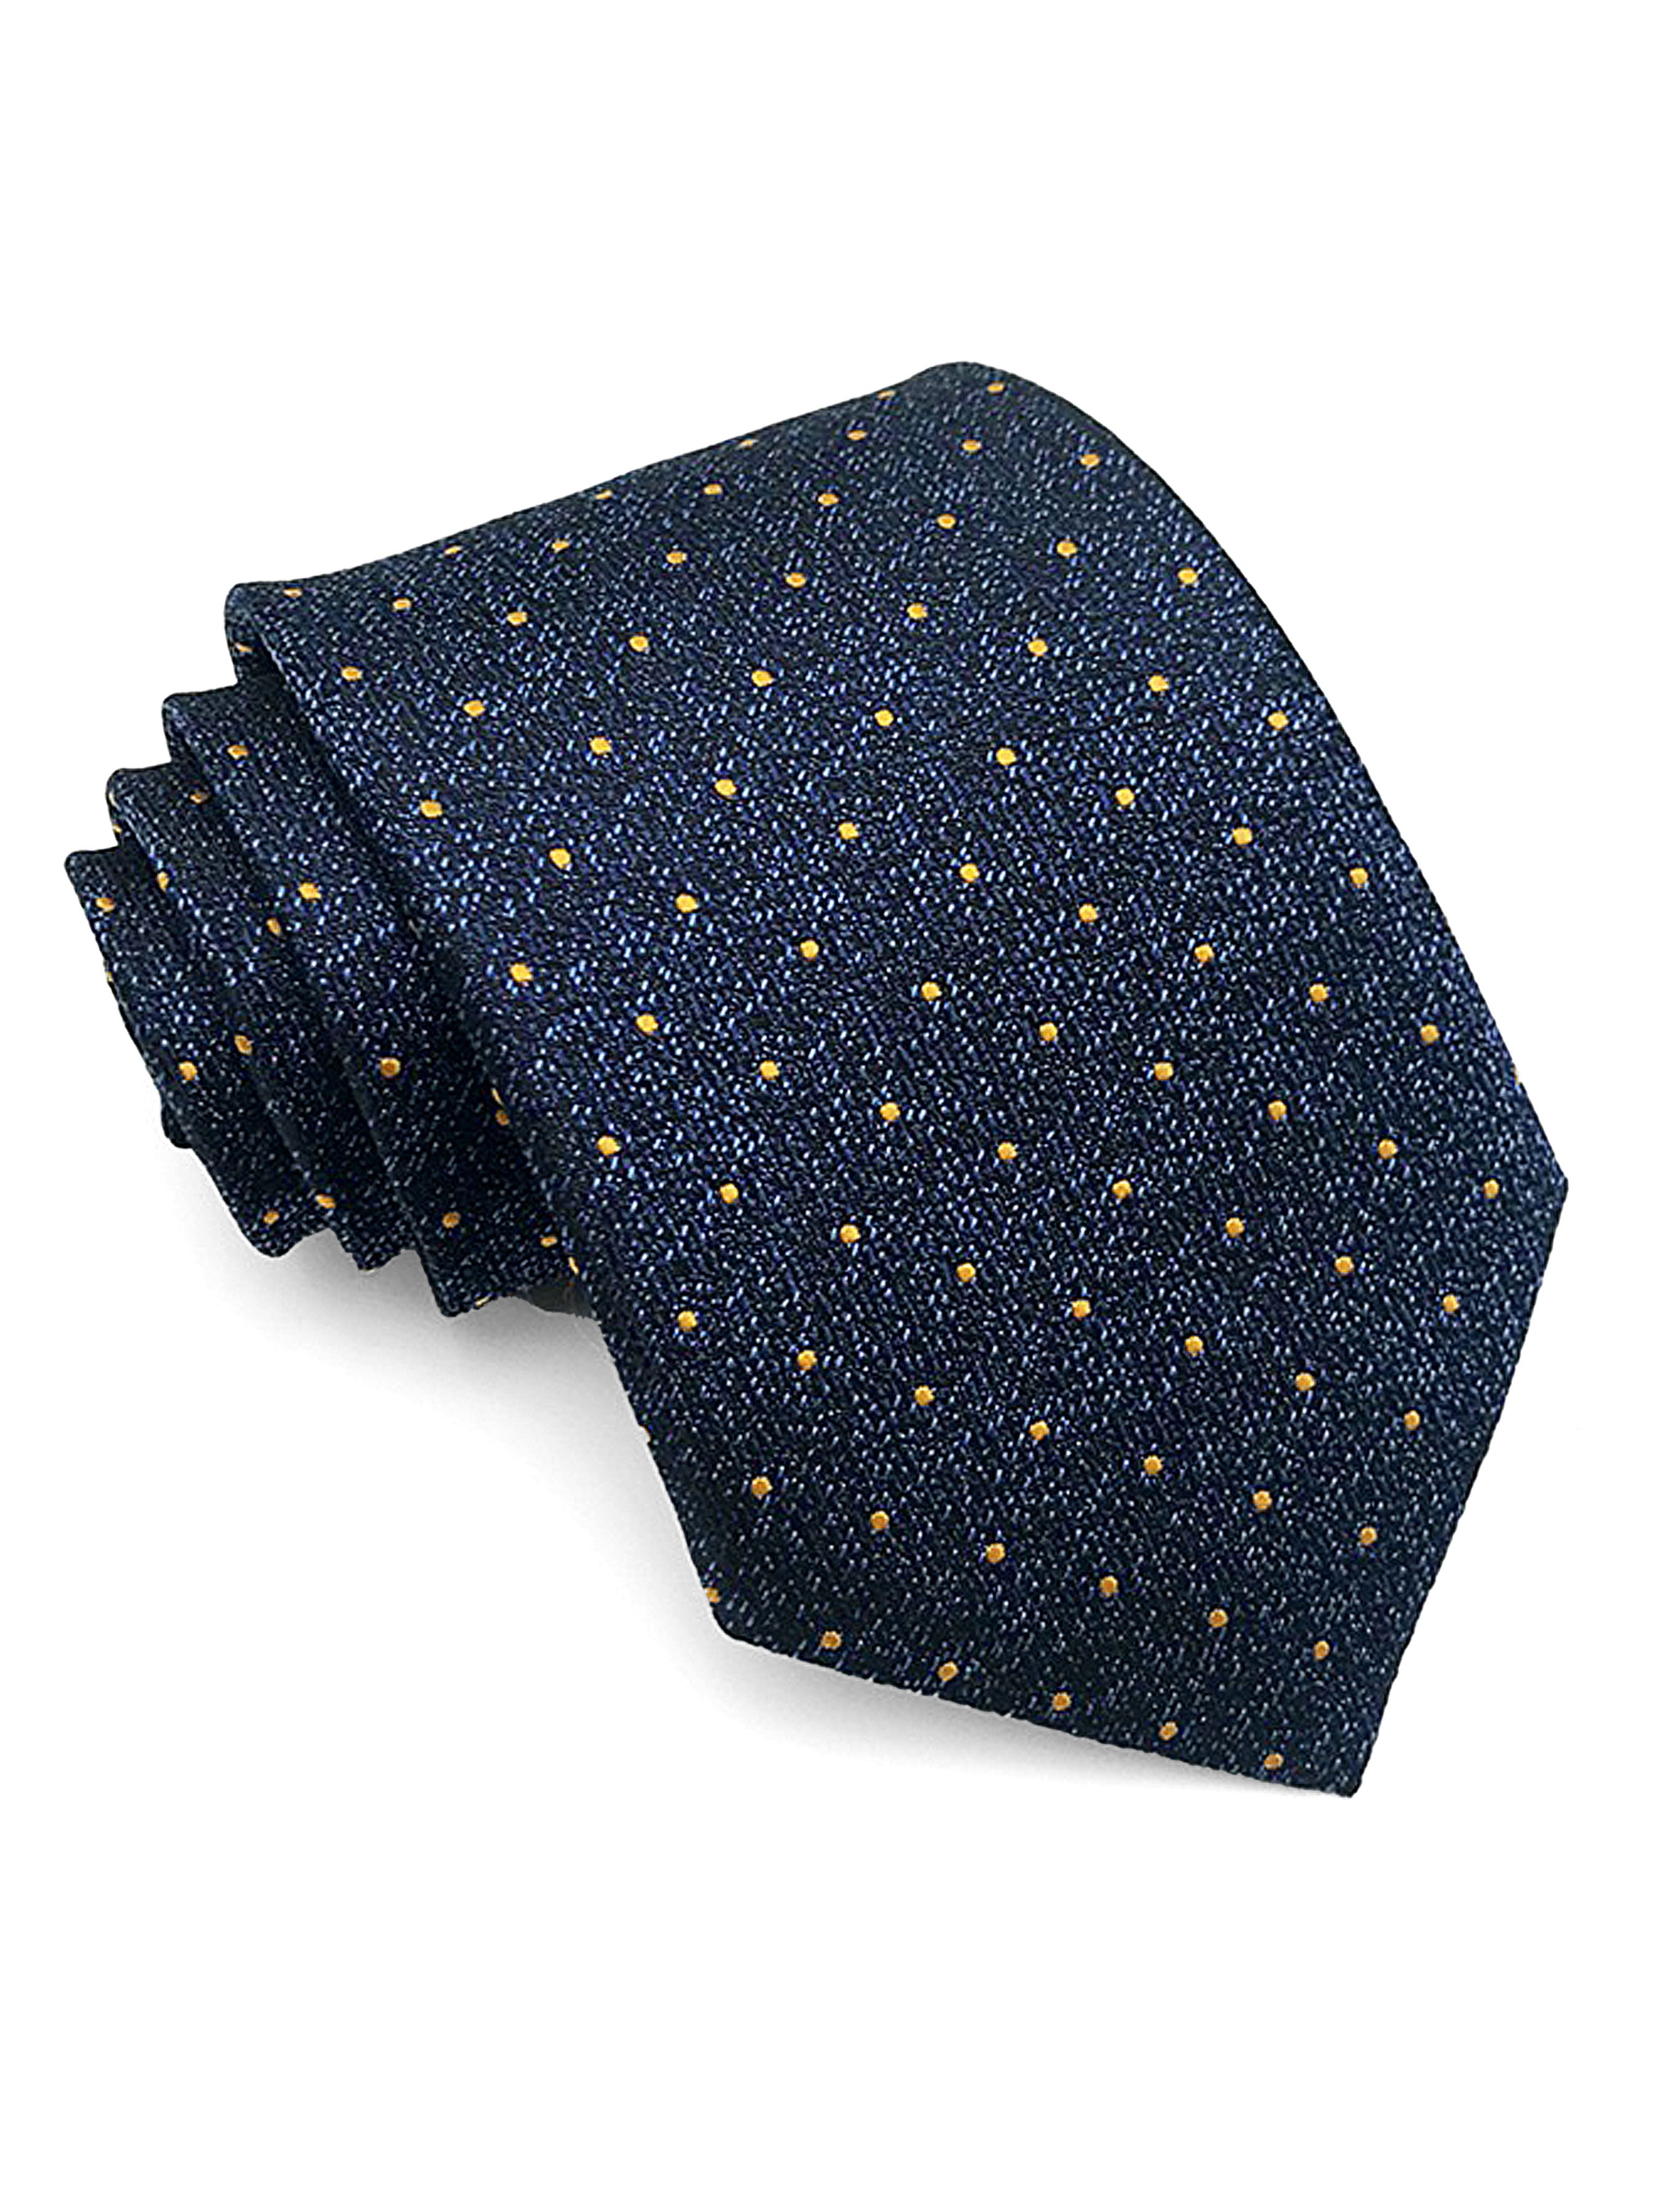 Polka Dot Tie - Black with Navy Blue Textured - Zeve Shoes